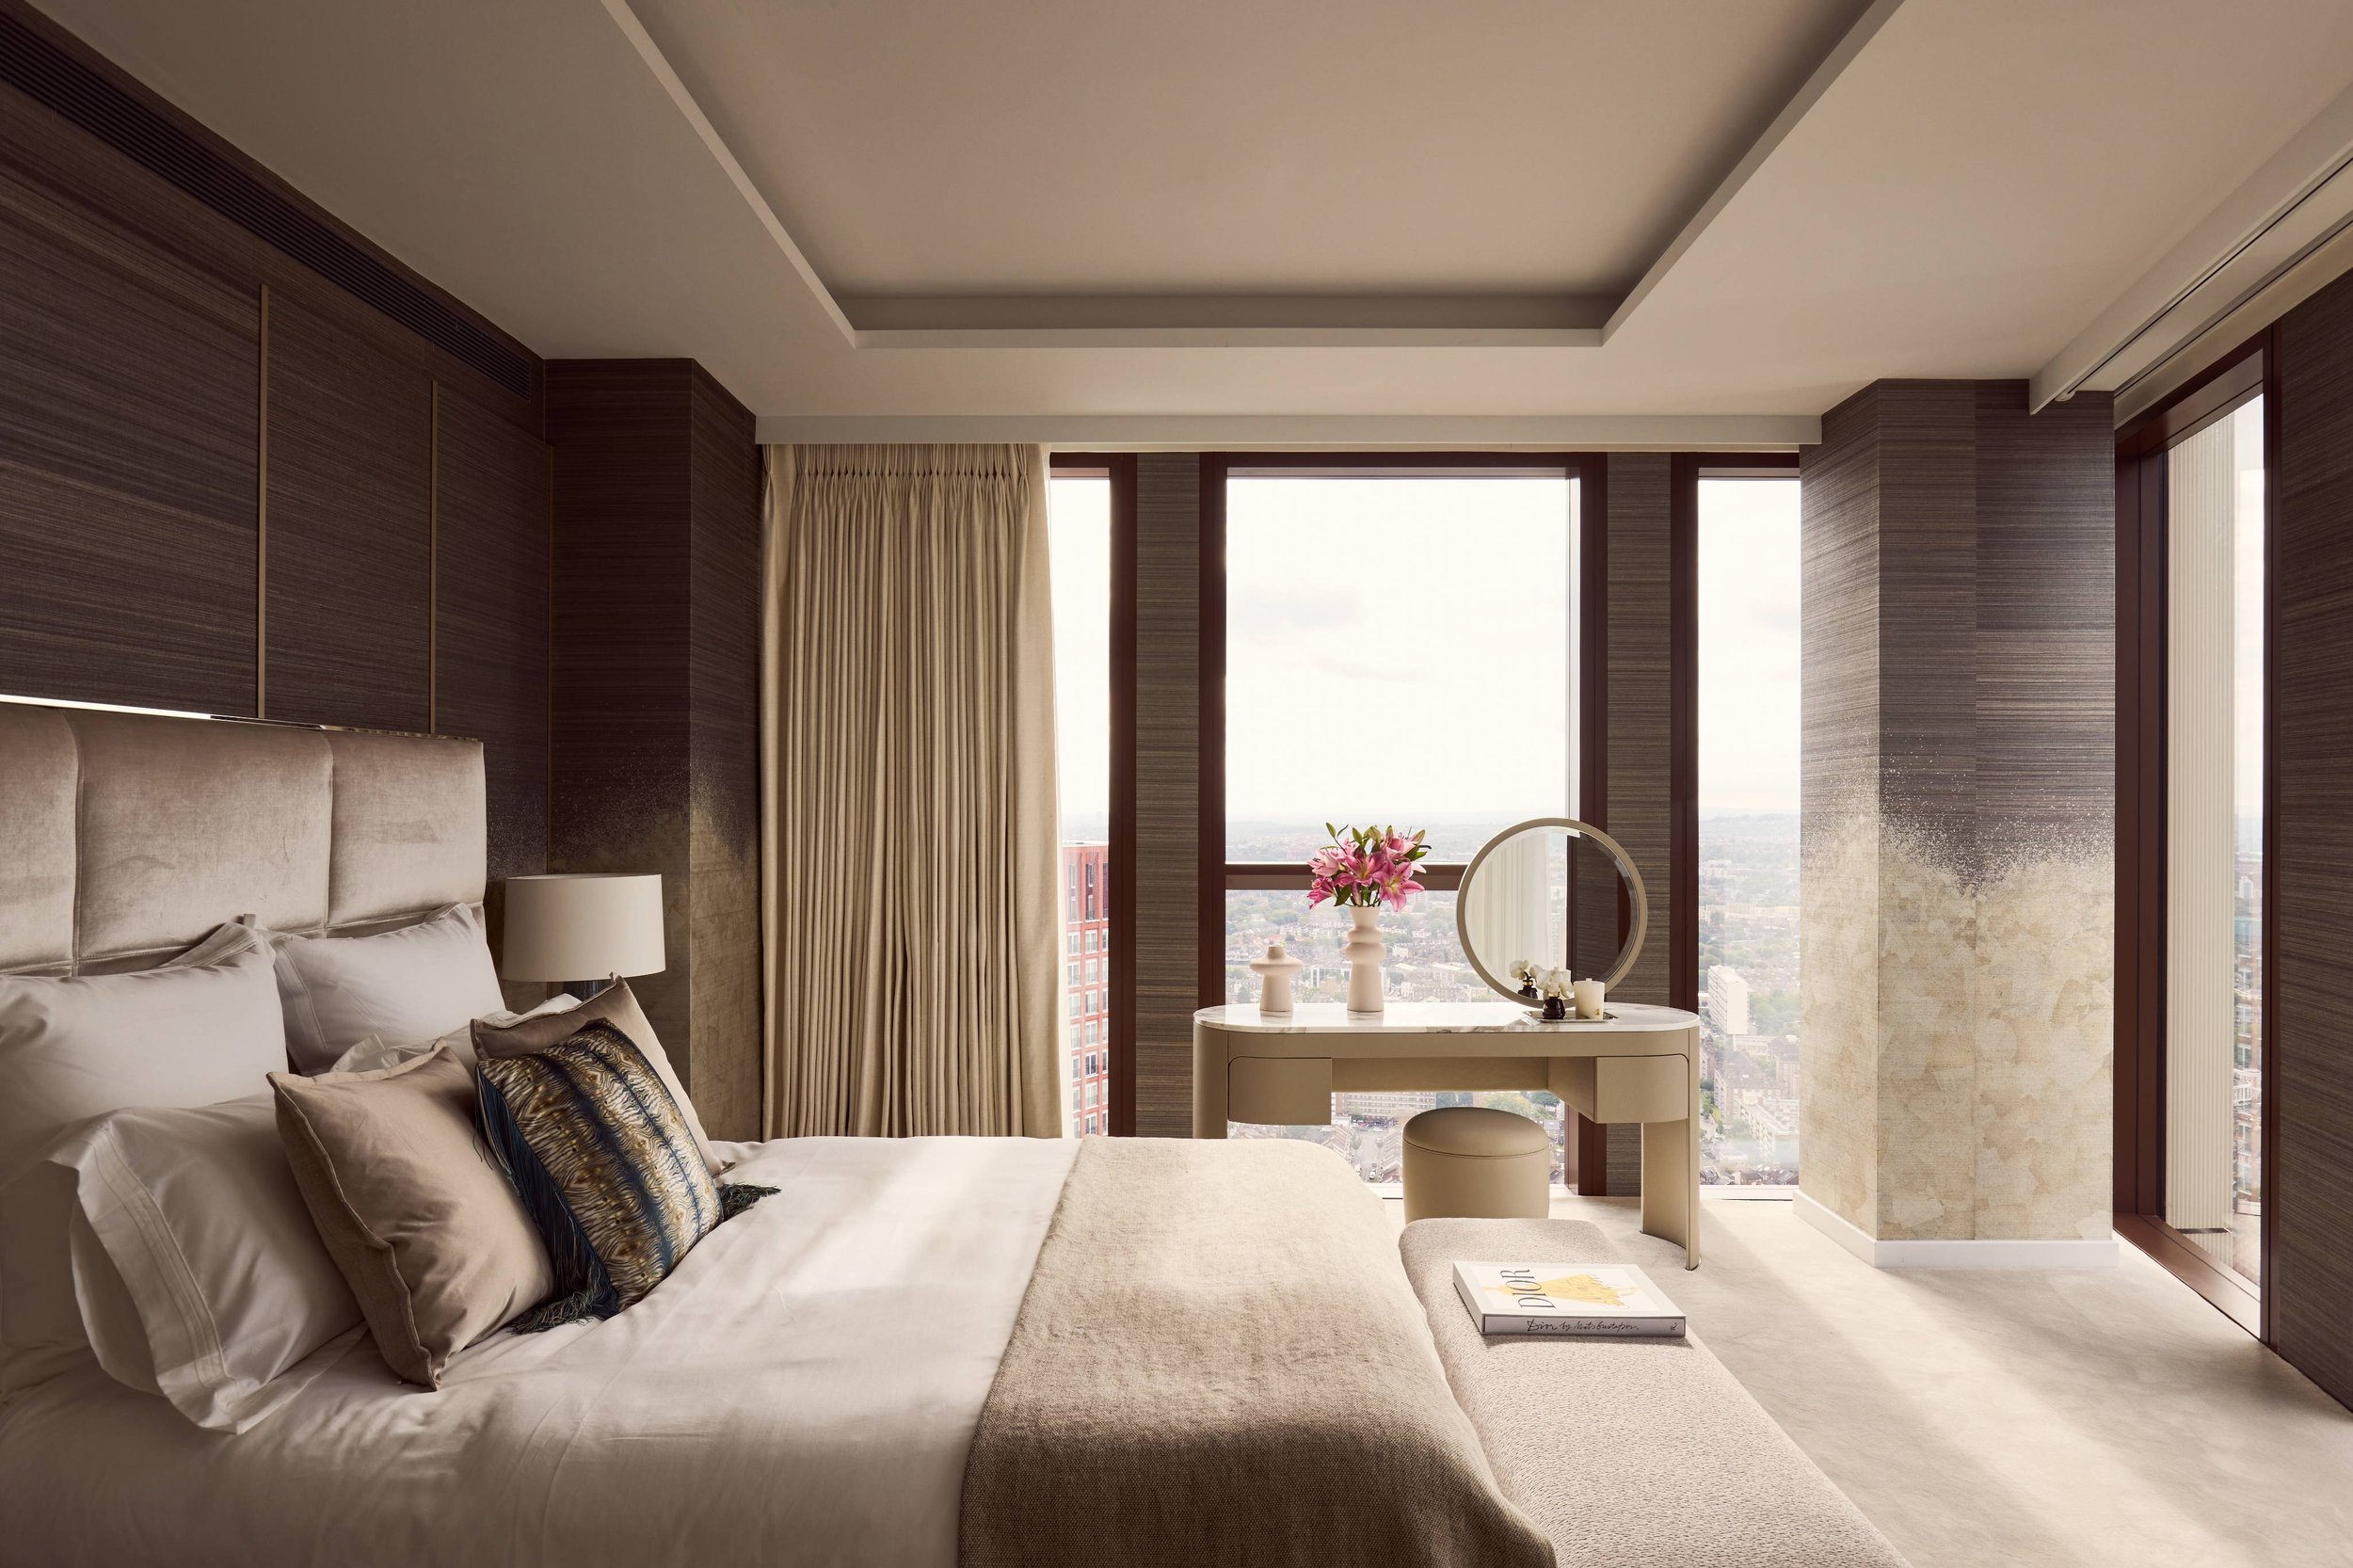 Thames City_Sky Collection_Harrods Interior Design Show Apartment_Bedroom_Credit-TobyMitchell2023-.jpg